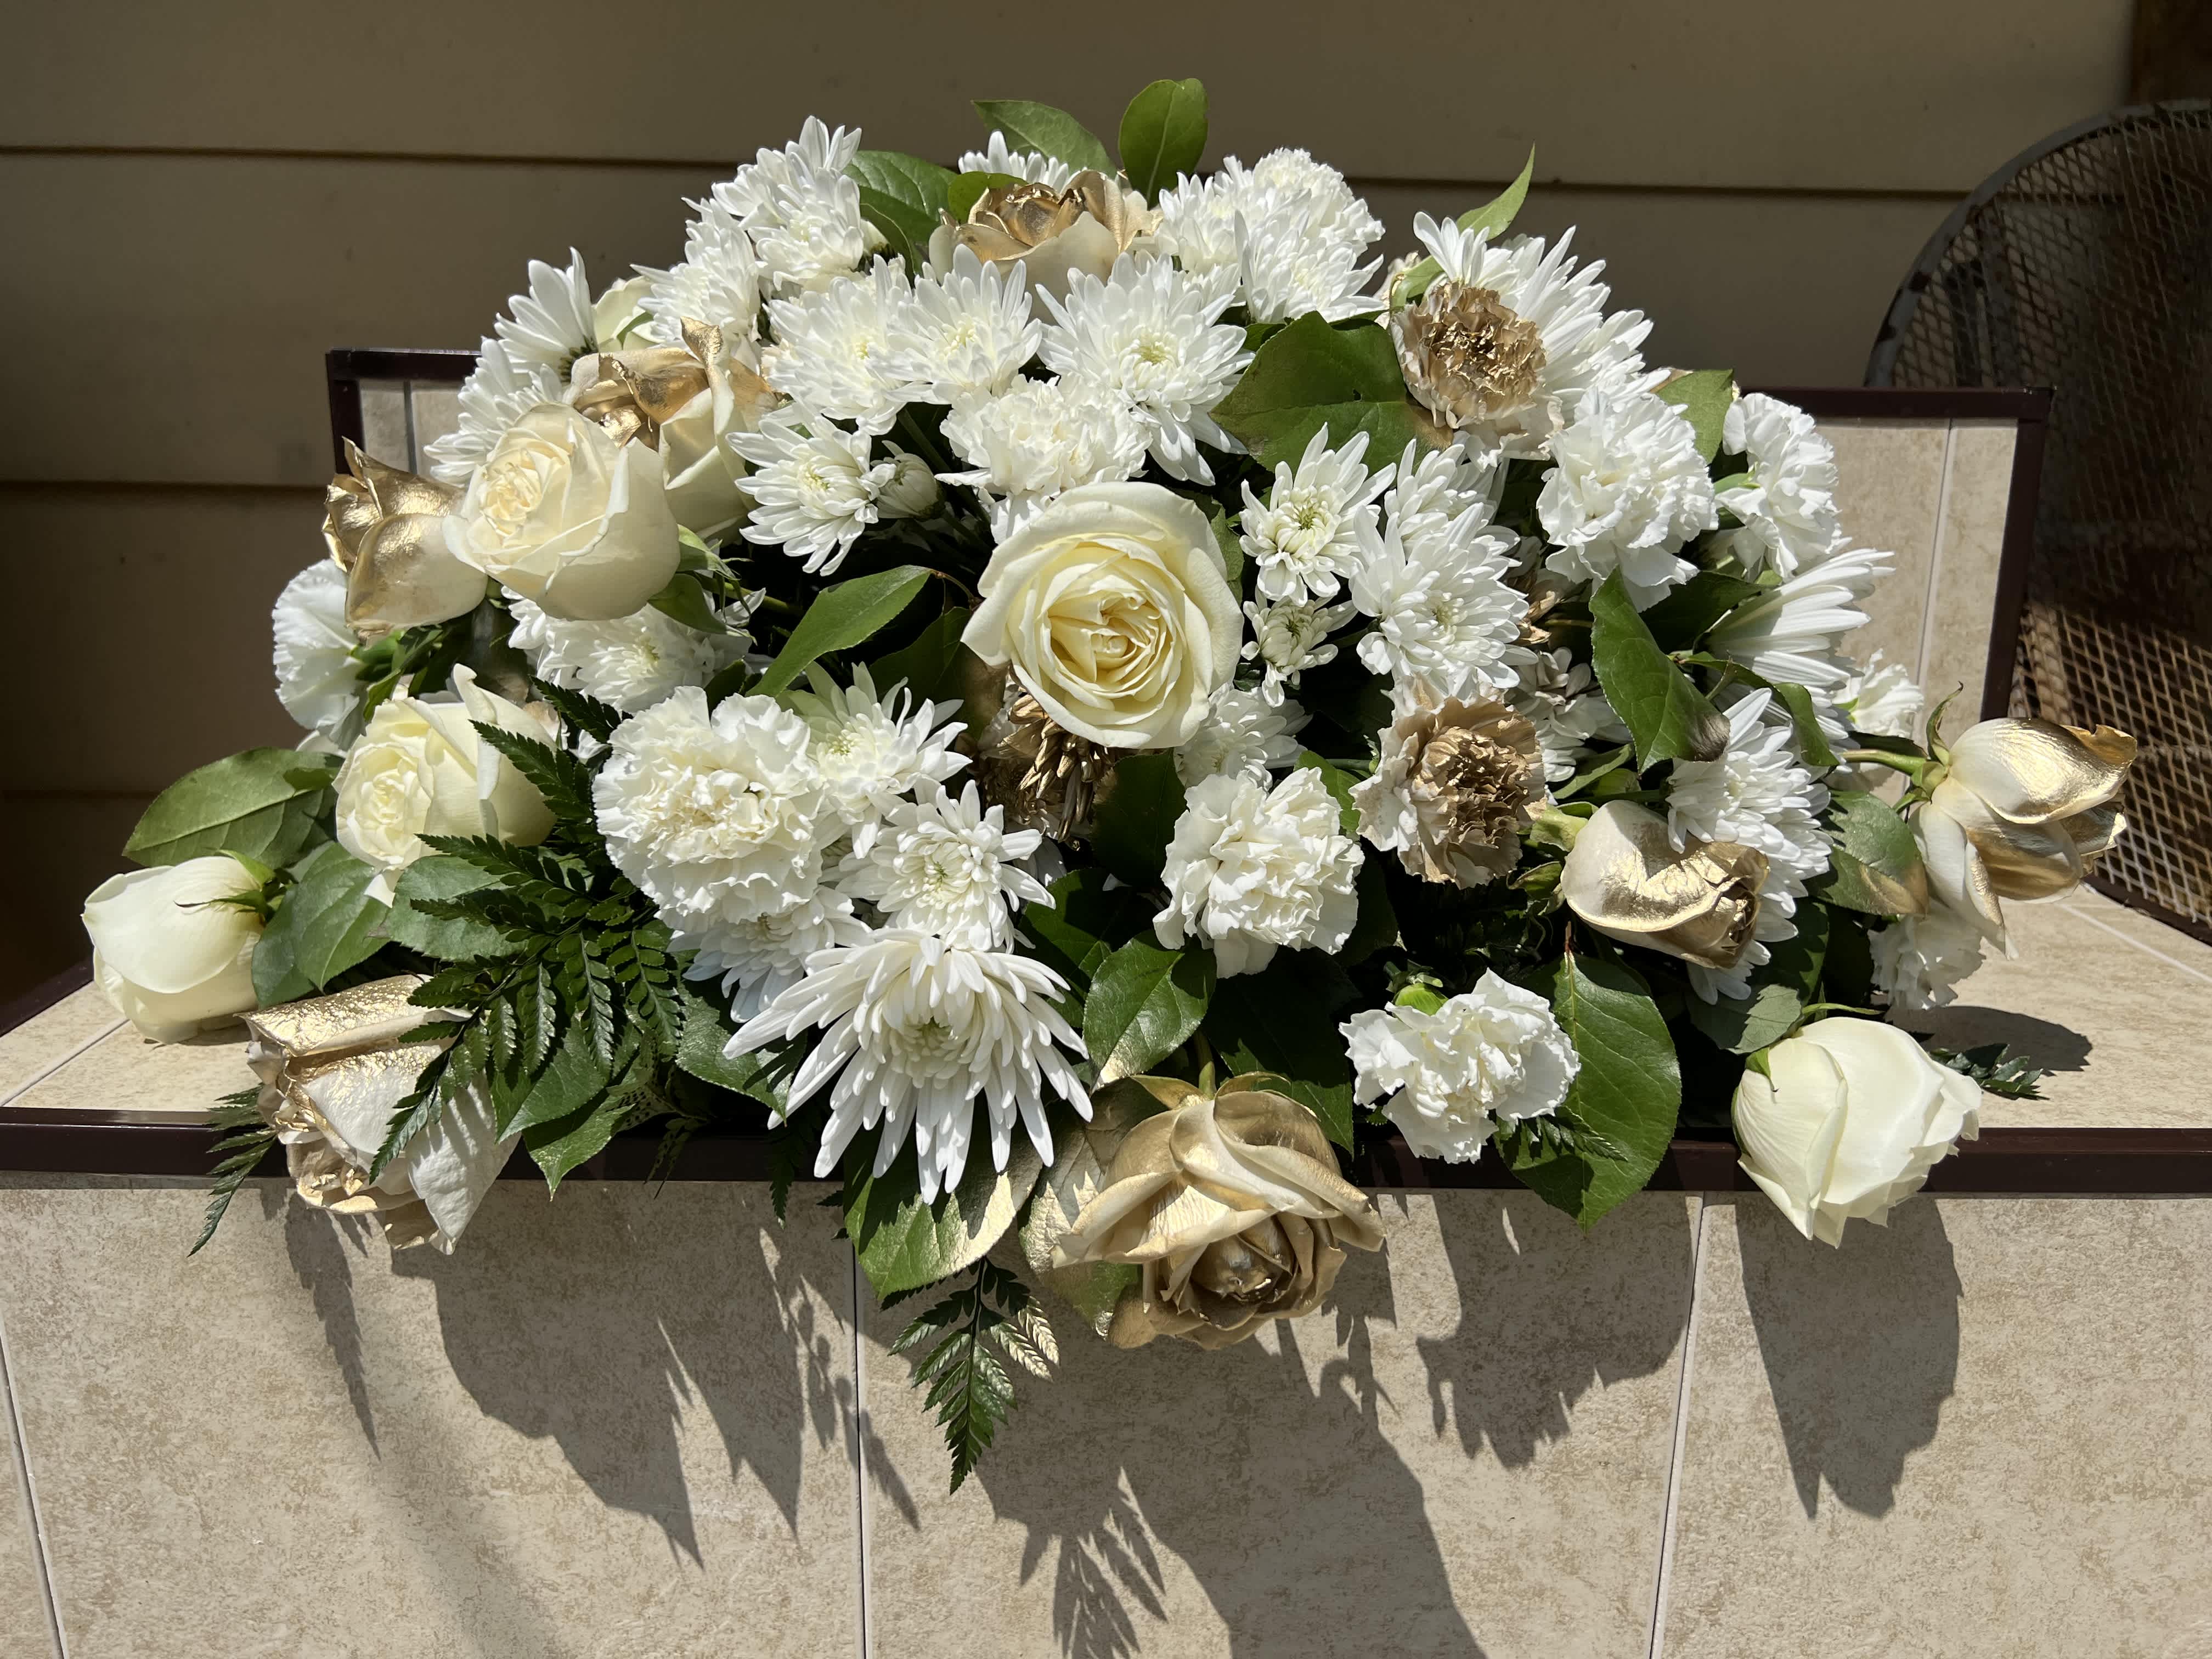 Gold and White casket spray  - Gold and white casket spray with roses and mixed flowers.  (All arrangements can be custom to colors of choice)